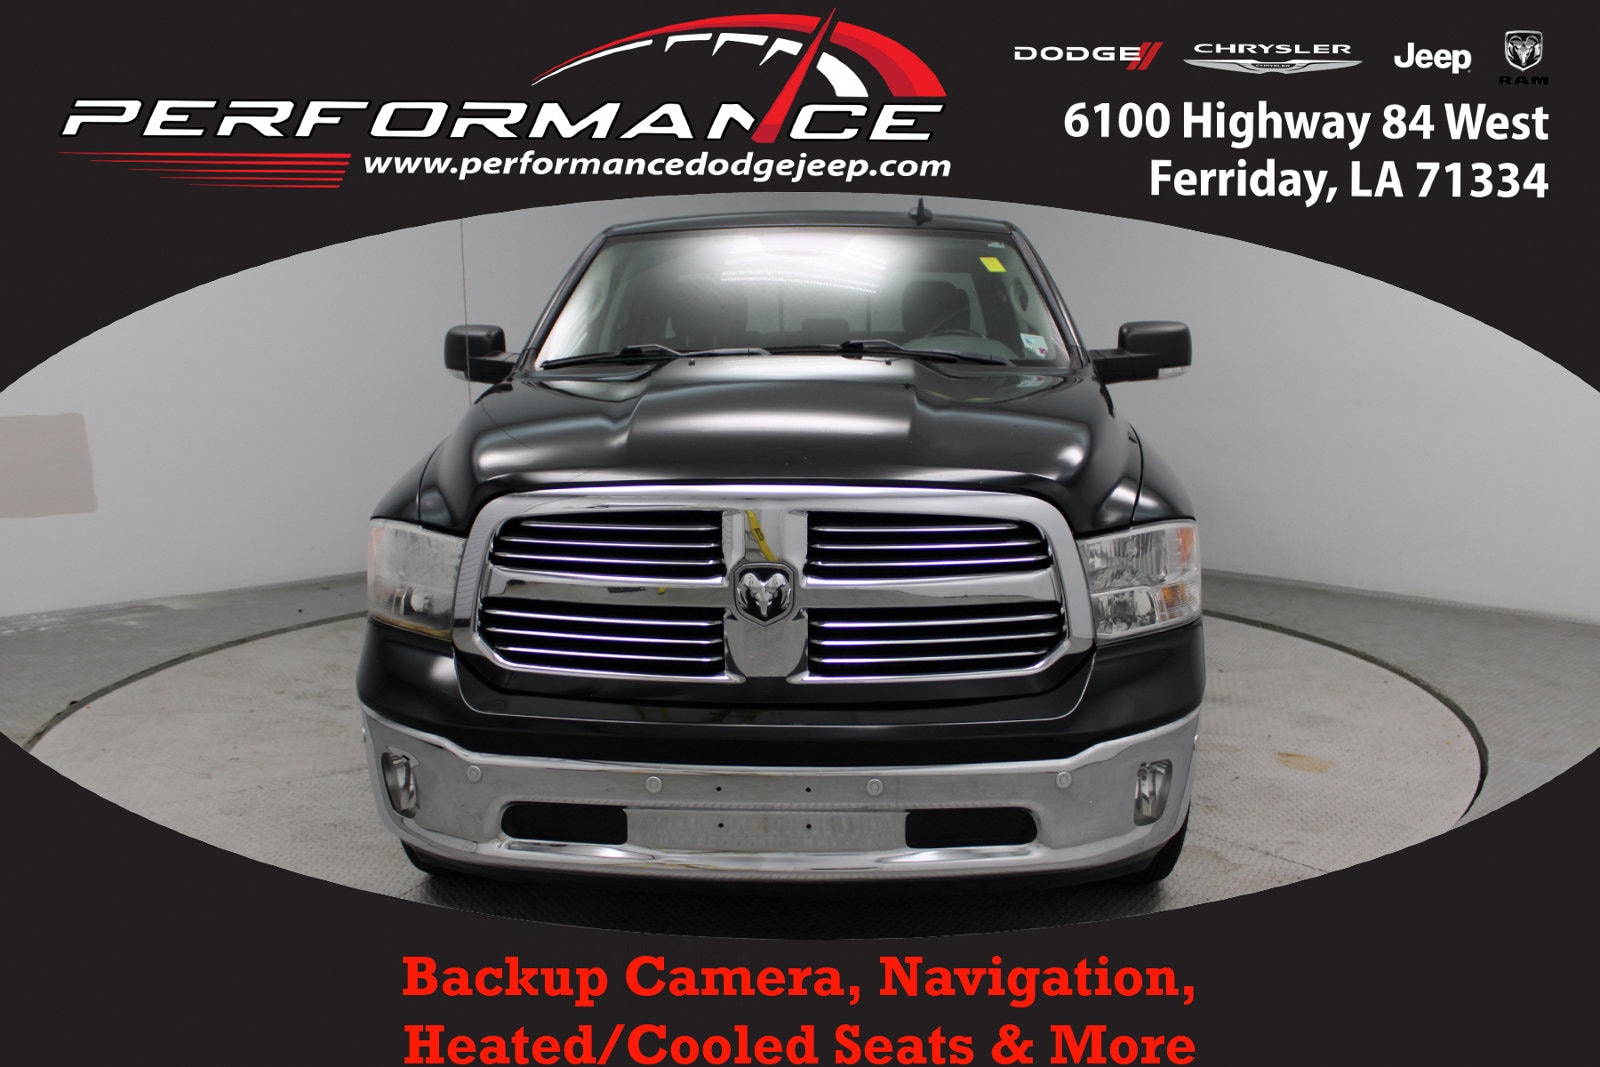 Used 2017 RAM Ram 1500 Pickup Big Horn with VIN 3C6RR7LT1HG735581 for sale in Ferriday, LA